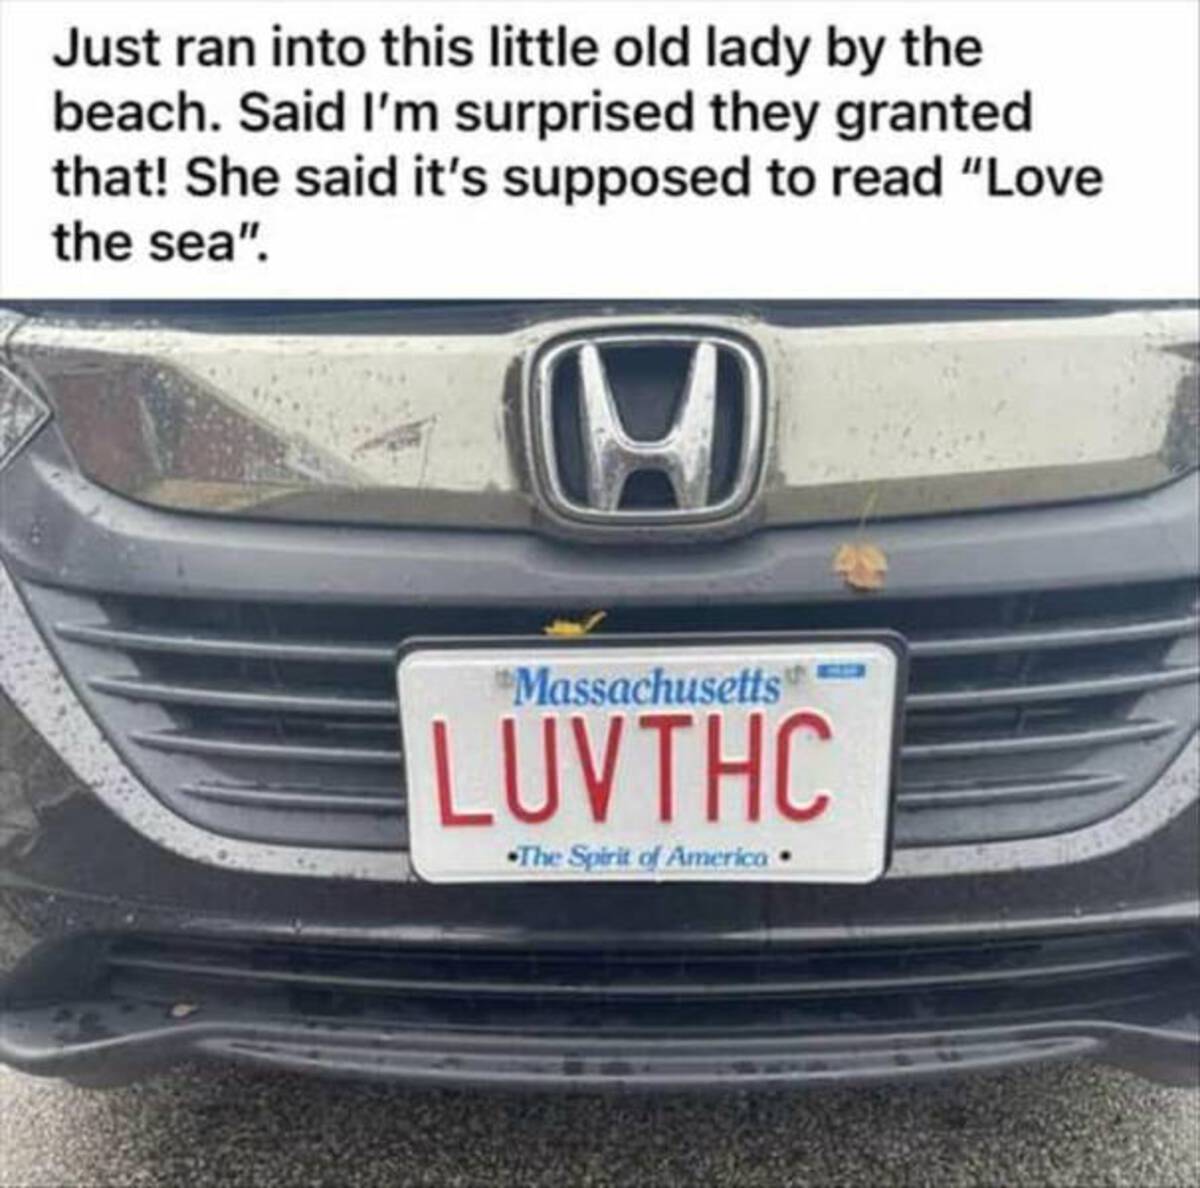 honda accord - Just ran into this little old lady by the beach. Said I'm surprised they granted that! She said it's supposed to read "Love the sea". H Massachusetts Luvthc The Spirit of America